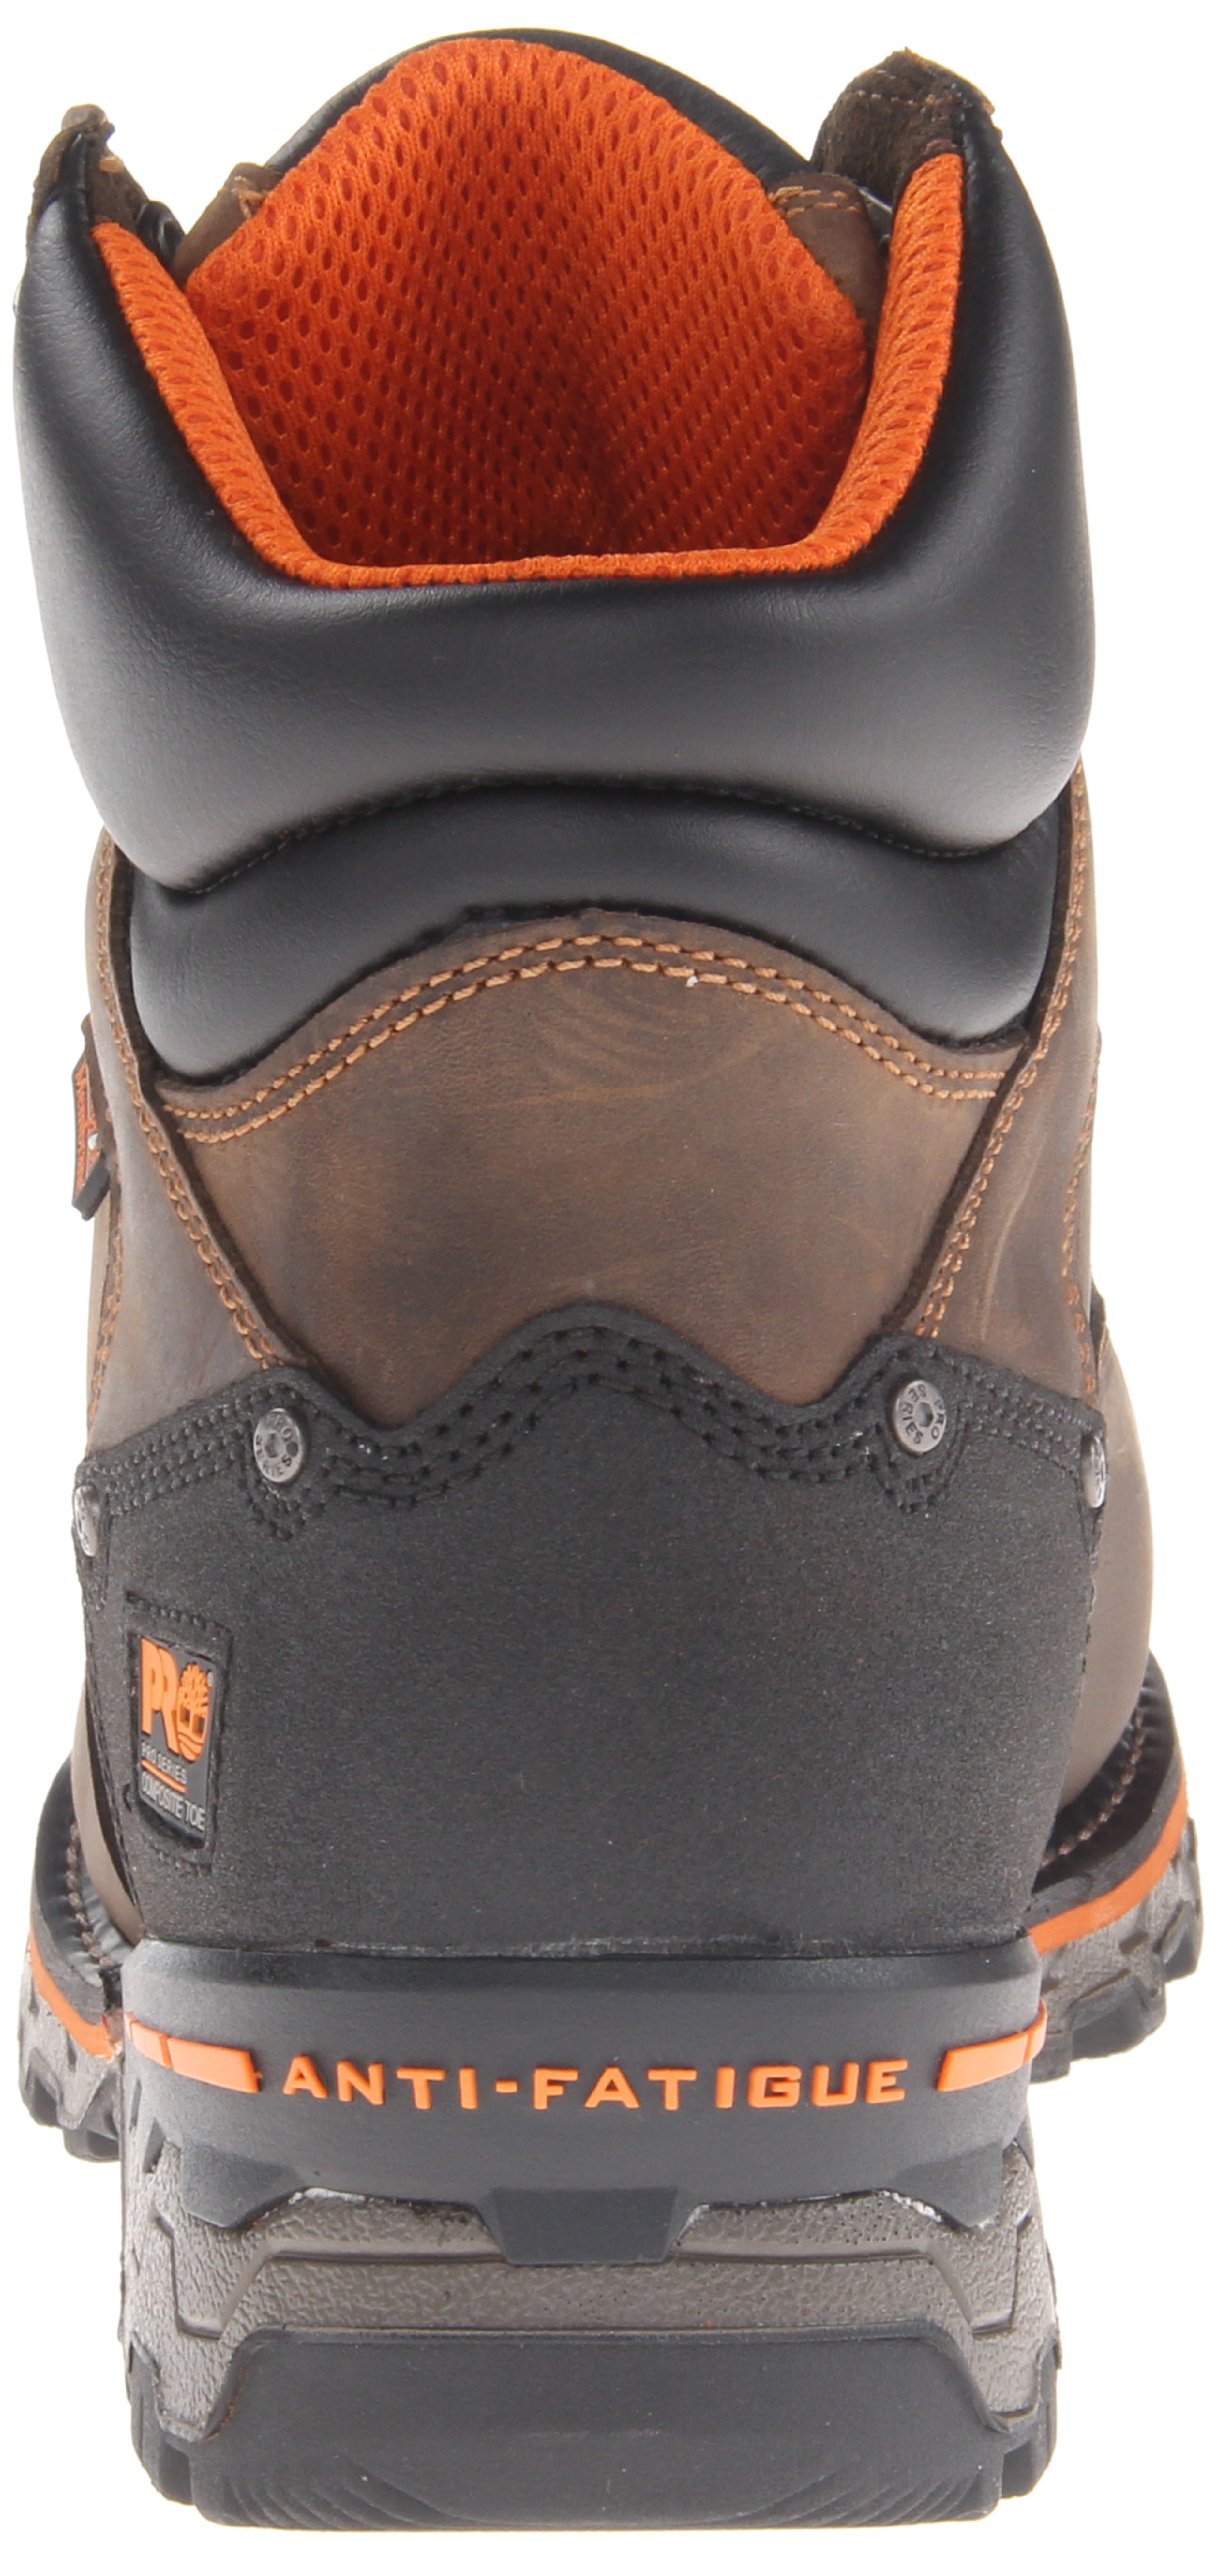 Timberland PRO Men's Boondock 6 Inch Composite Safety Toe Waterproof 6 CT WP, Brown, 10 Wide